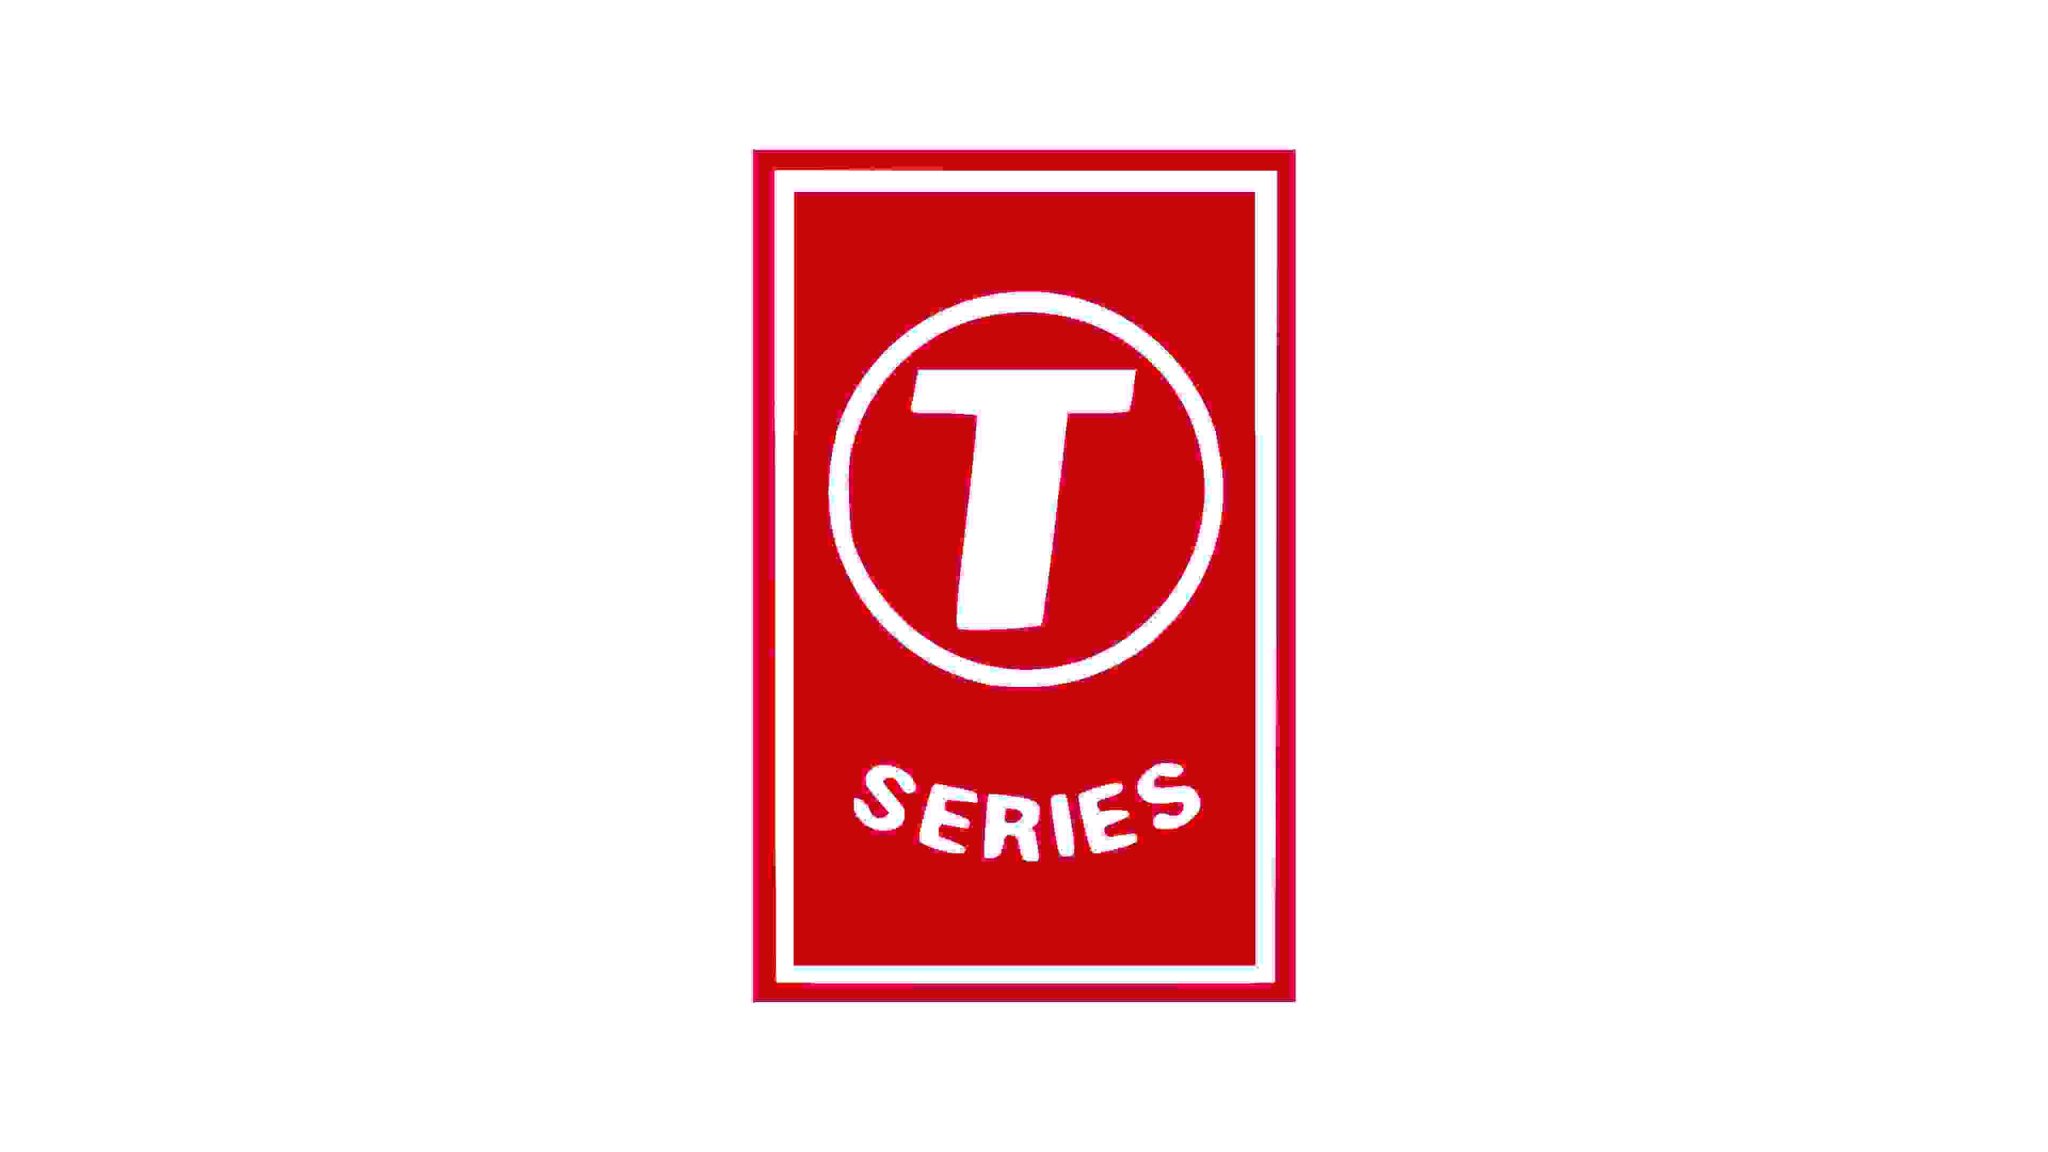 T-Series' logo on a white background.